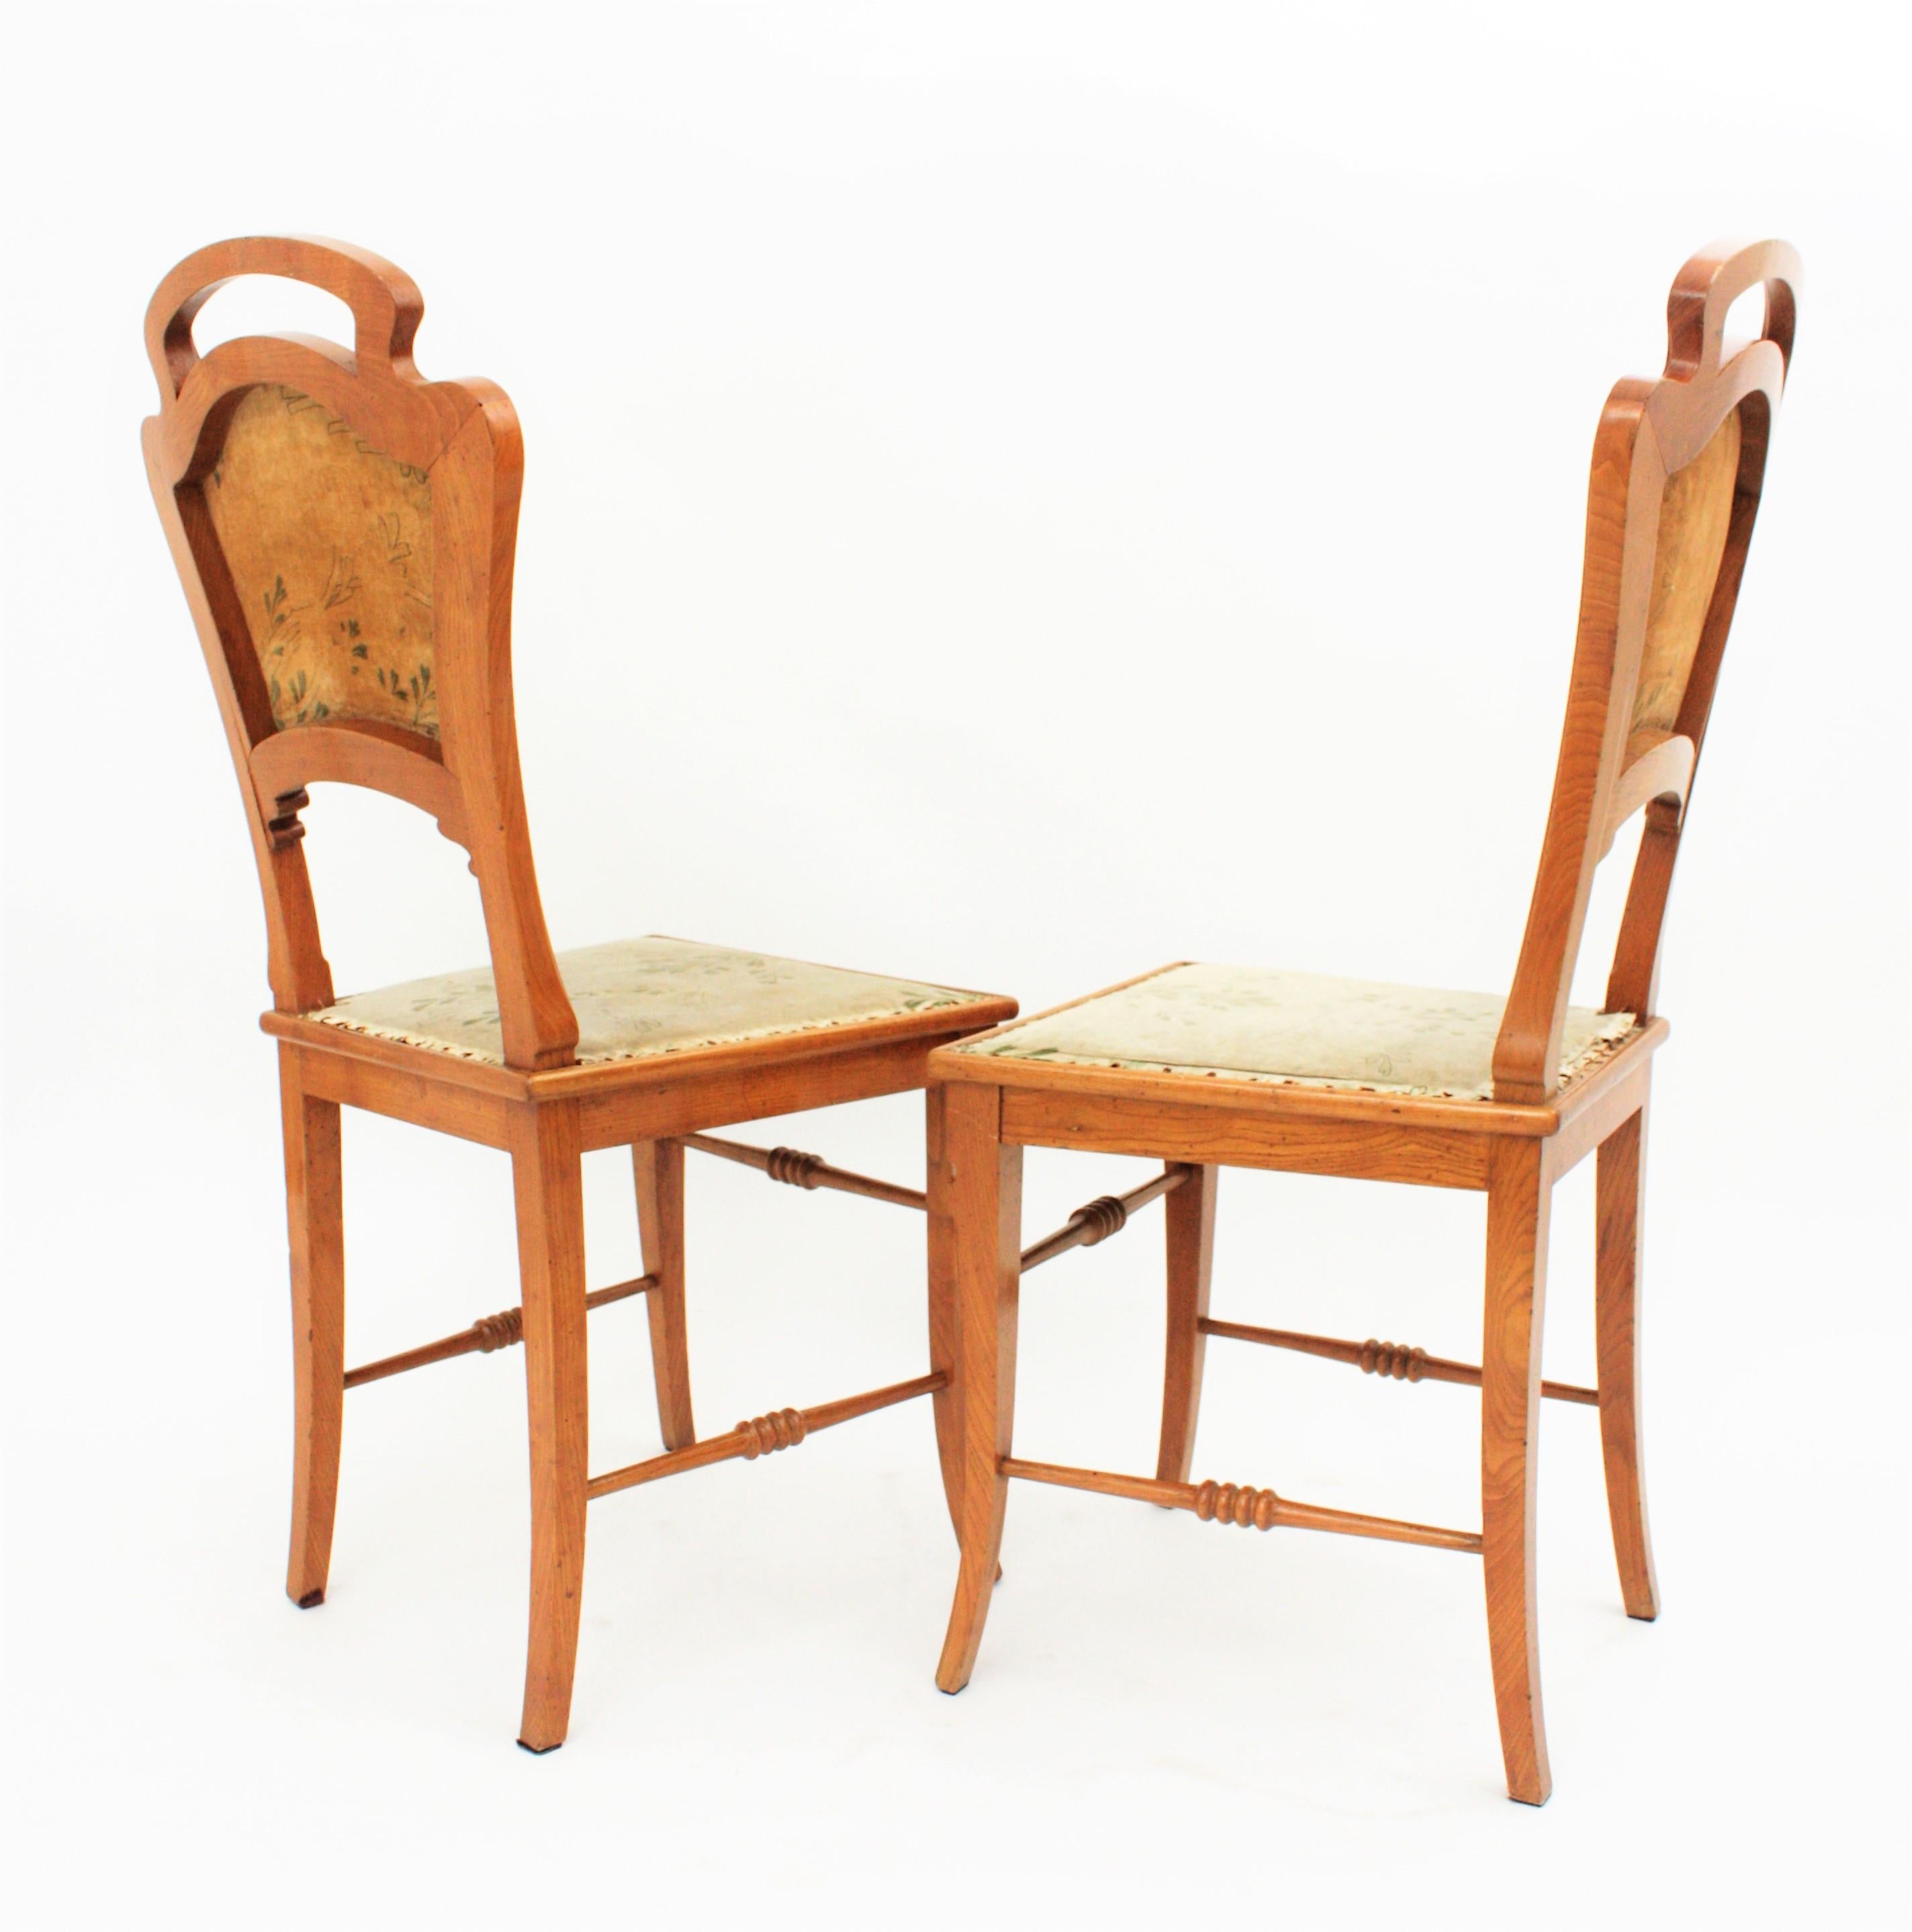 20th Century Spanish Art Nouveau Antoni Gaudi Style Pair of Carved Ashwood Side Chairs For Sale